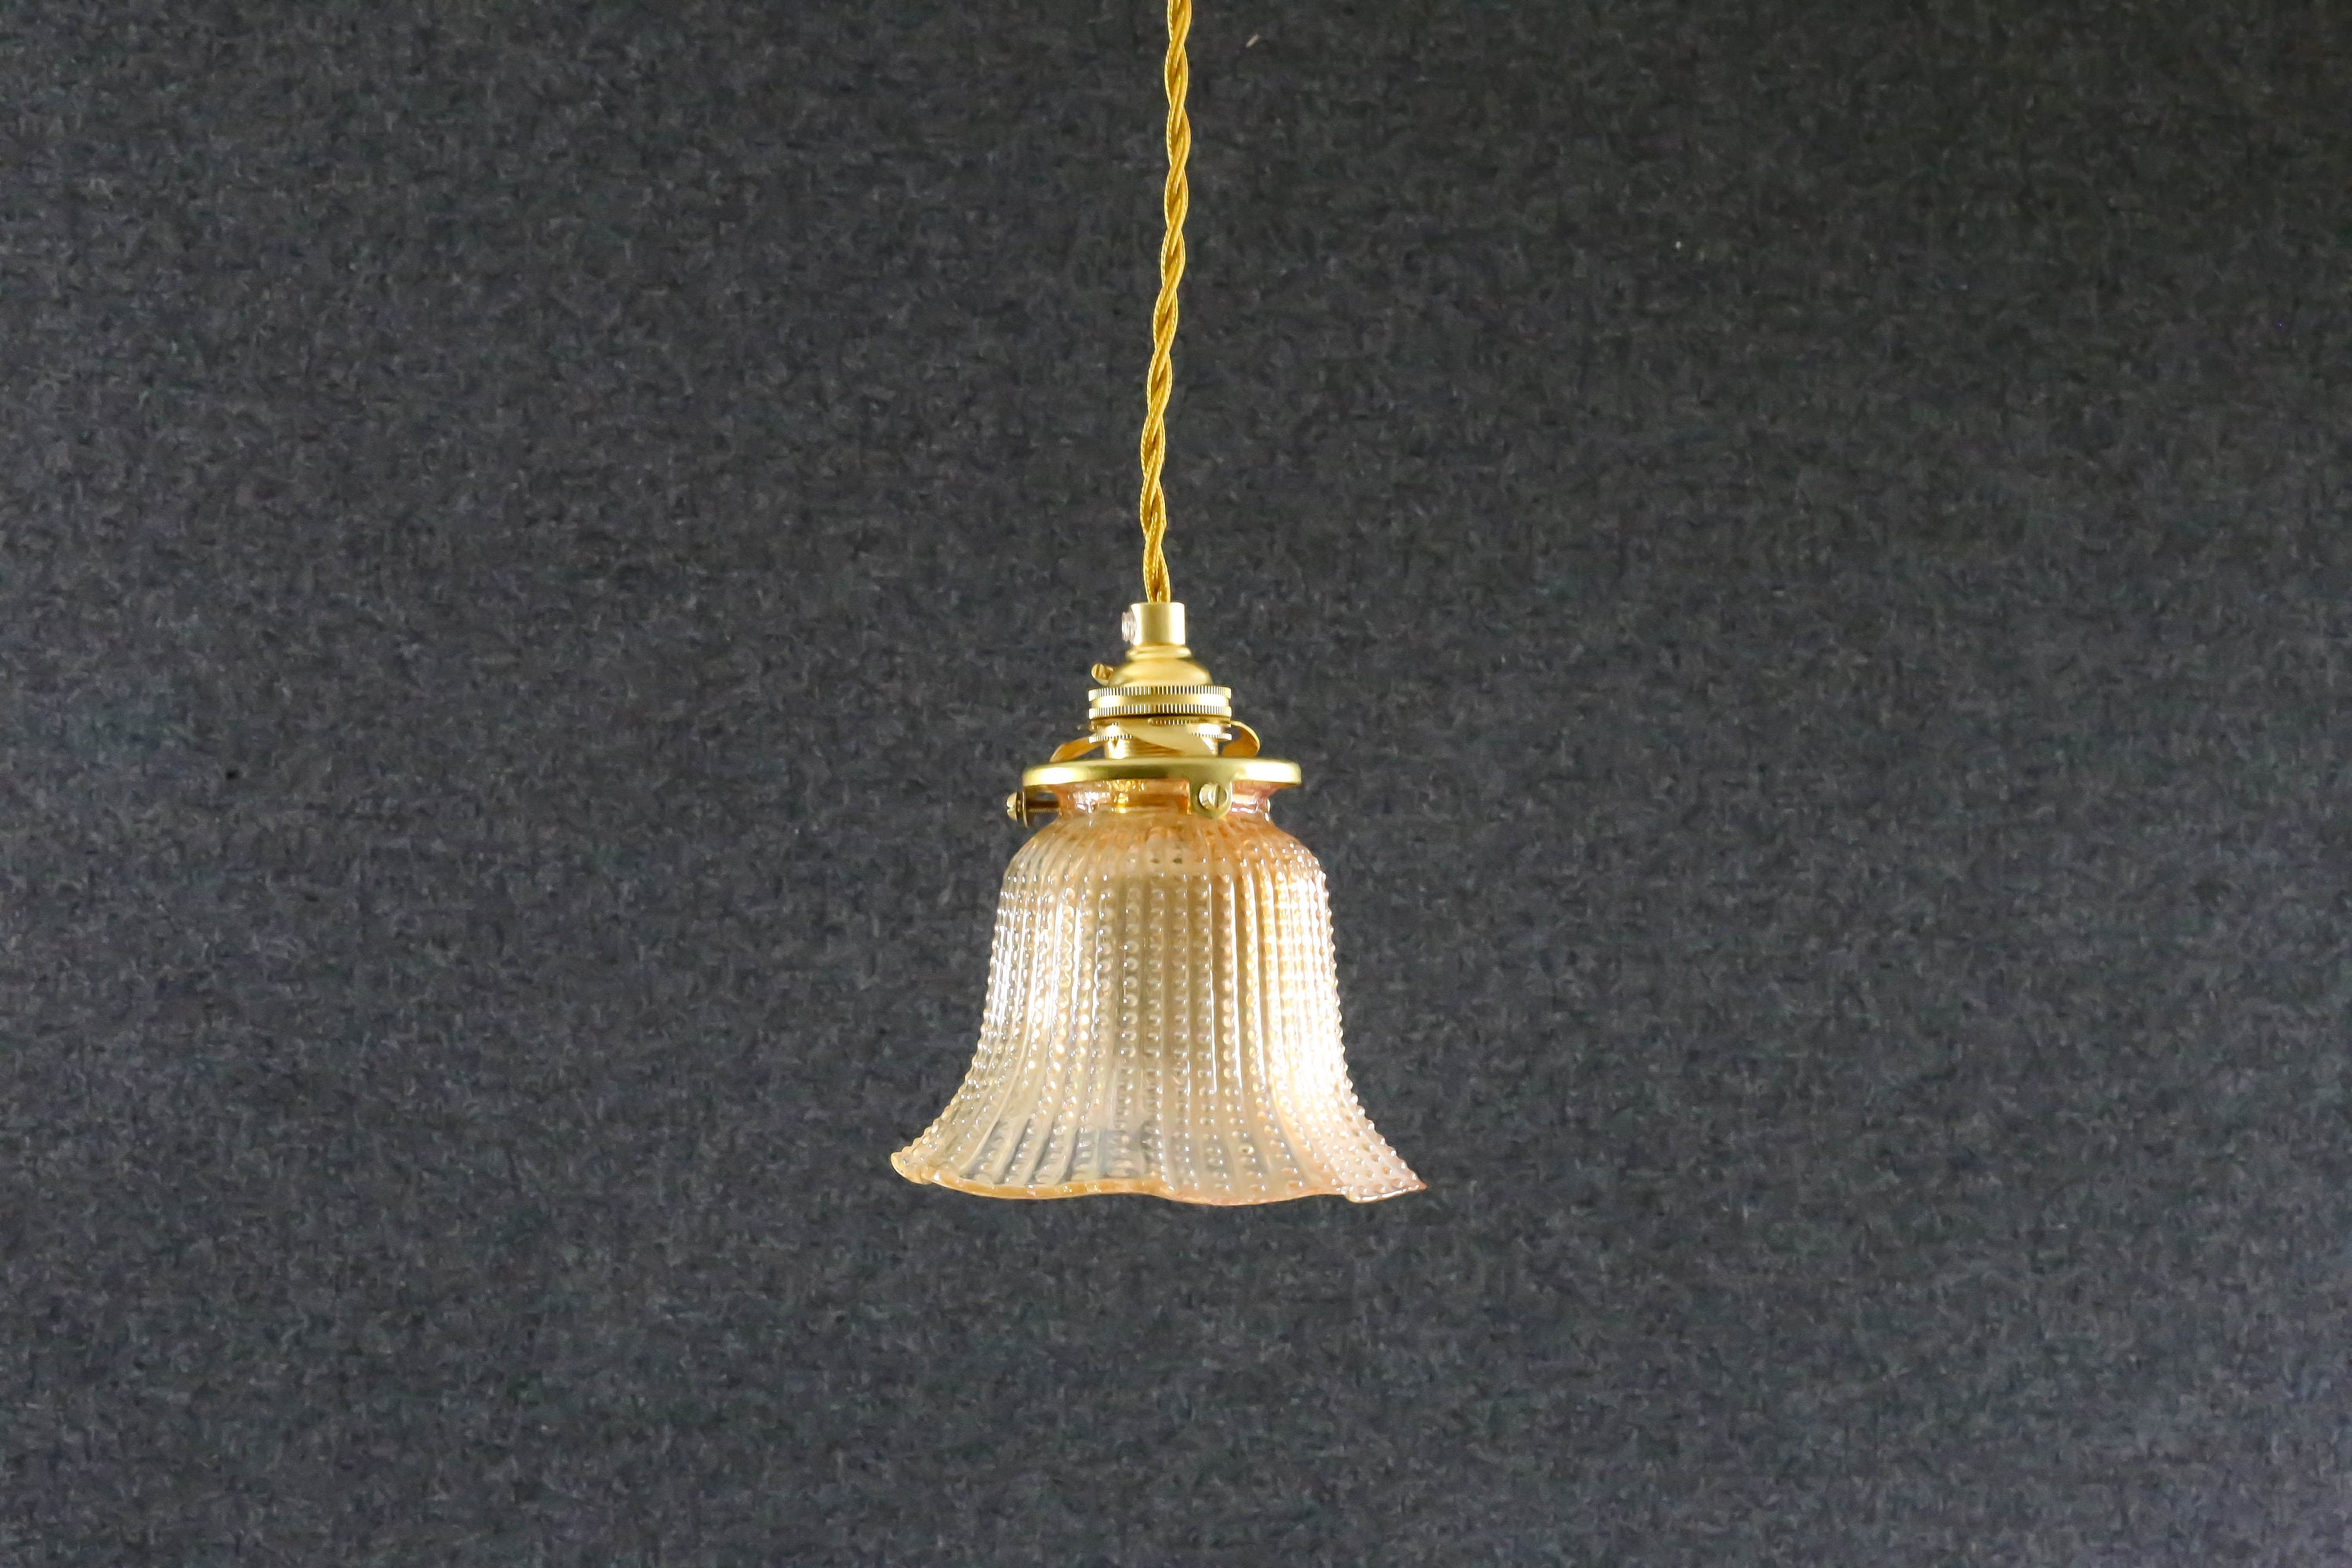 Antique French Ceiling Light in Yellow Translucid Striped Glass, Pendant Lamp - Old Tulip Model- Art